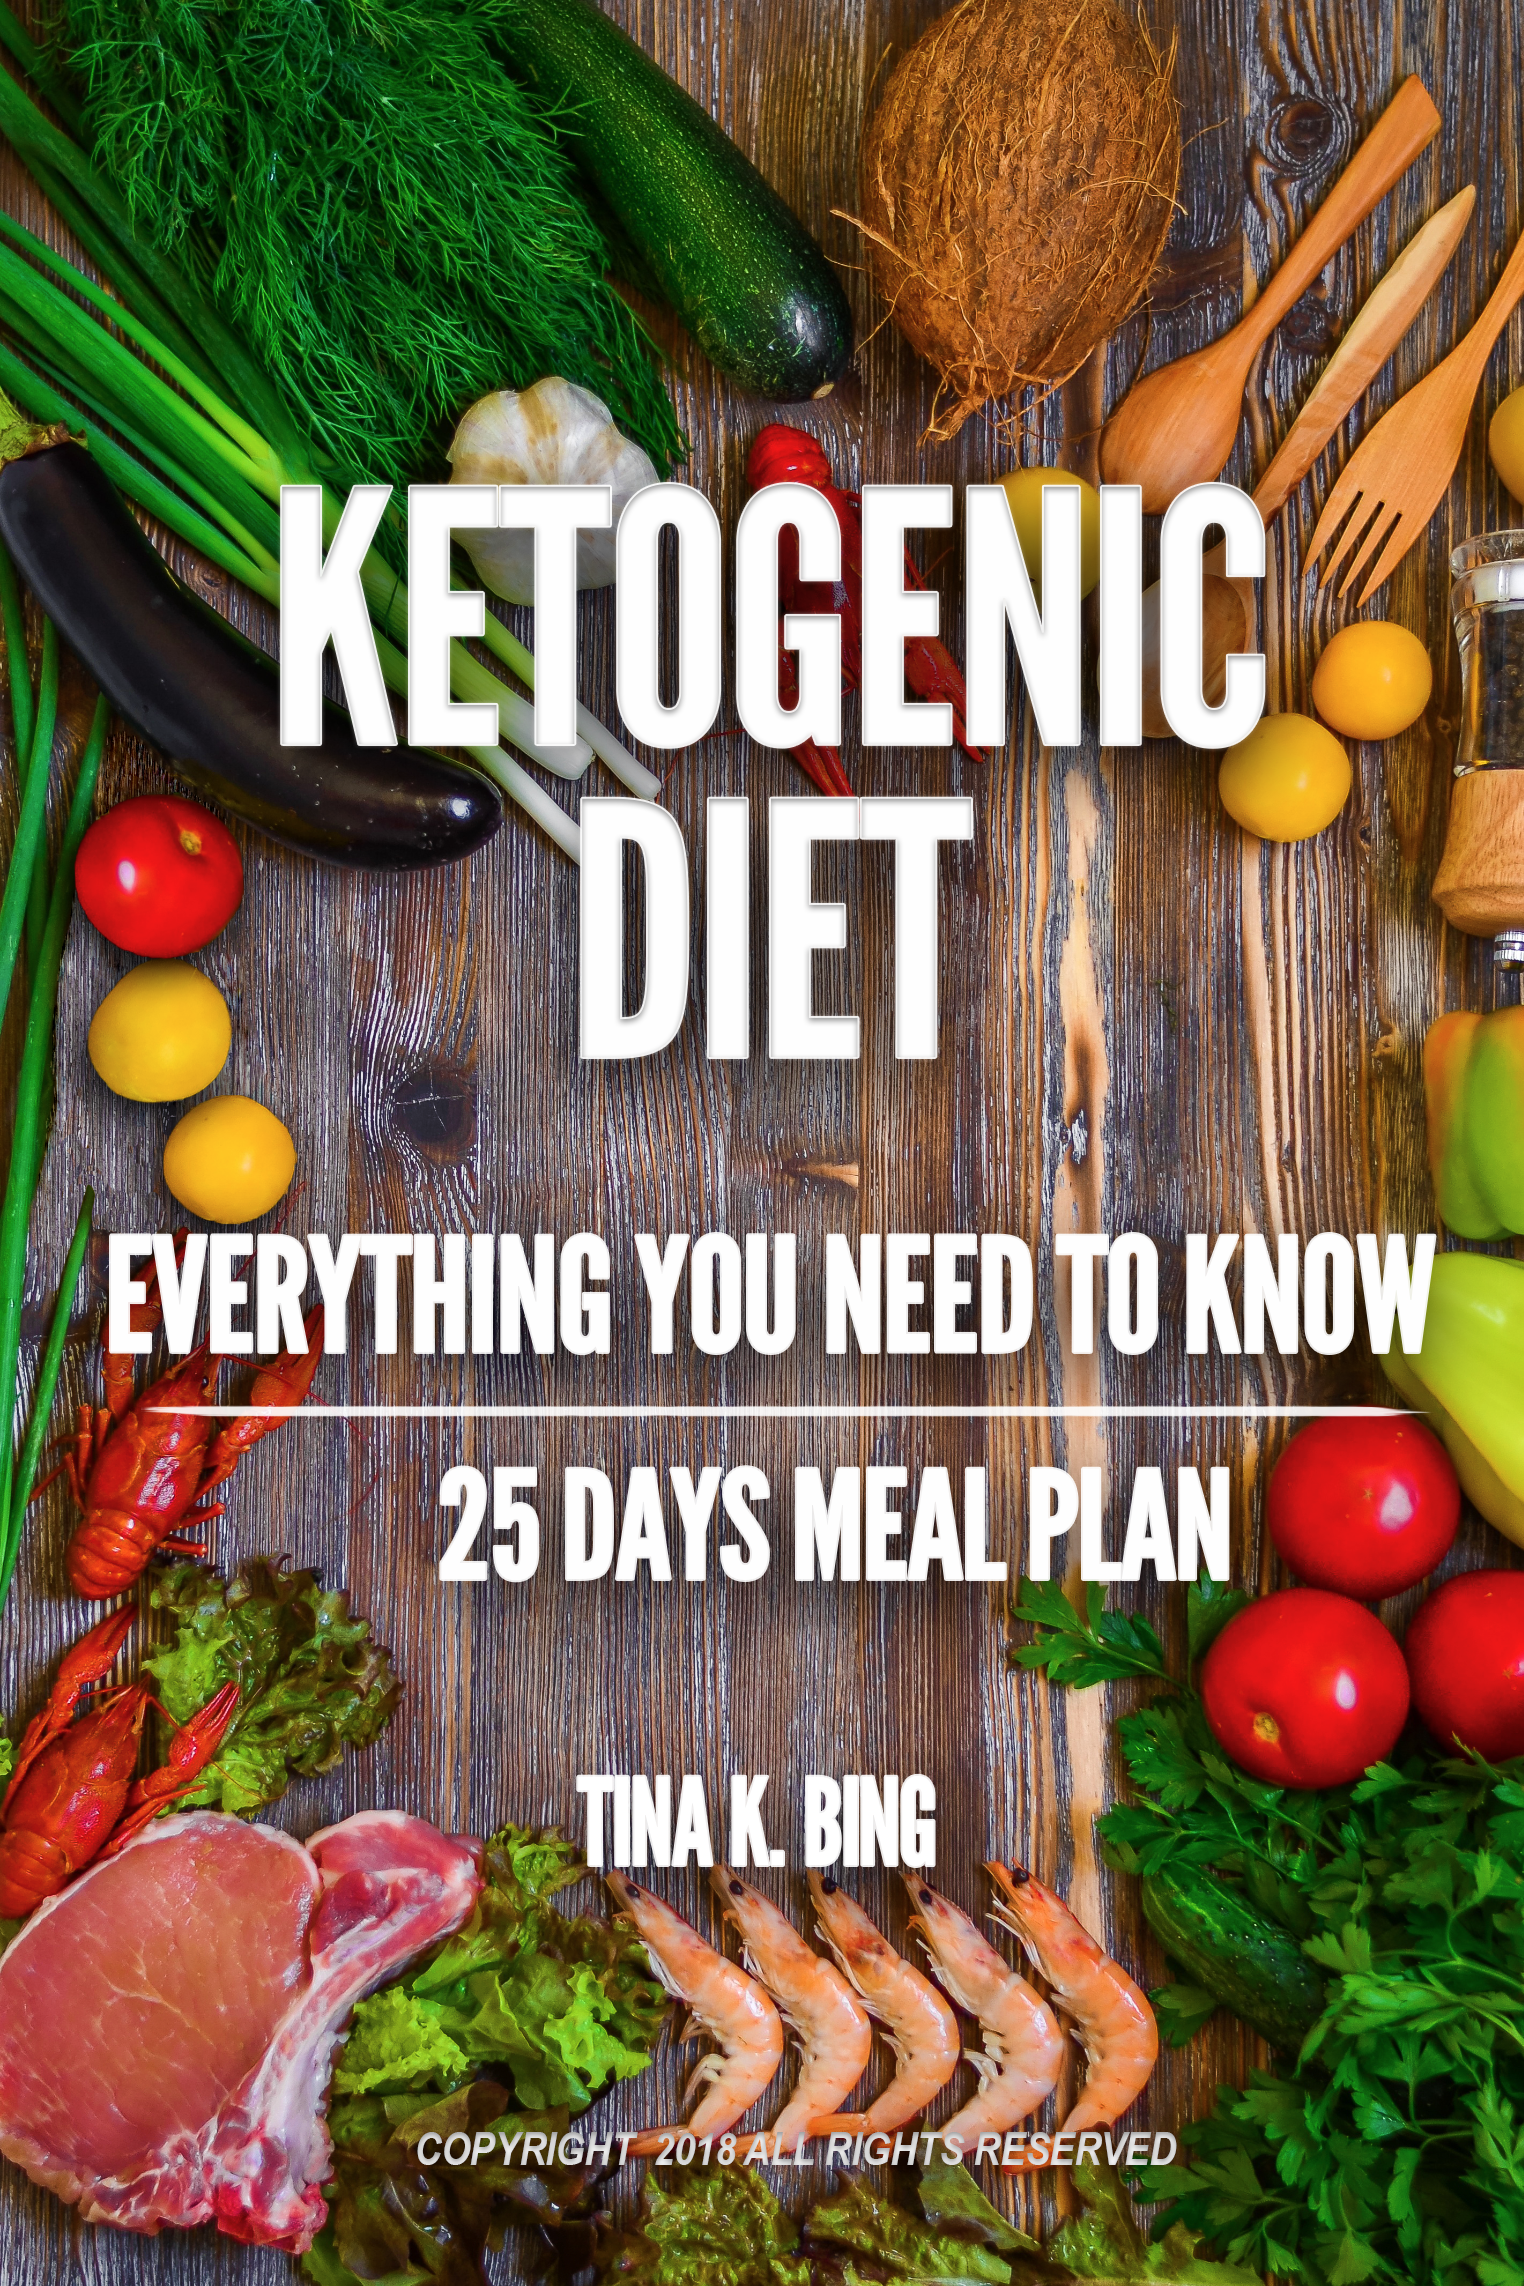 FREE: Ketogenic diet: Everything You Need to Know. 25 Days Meal Plan. by Tina K. Bing